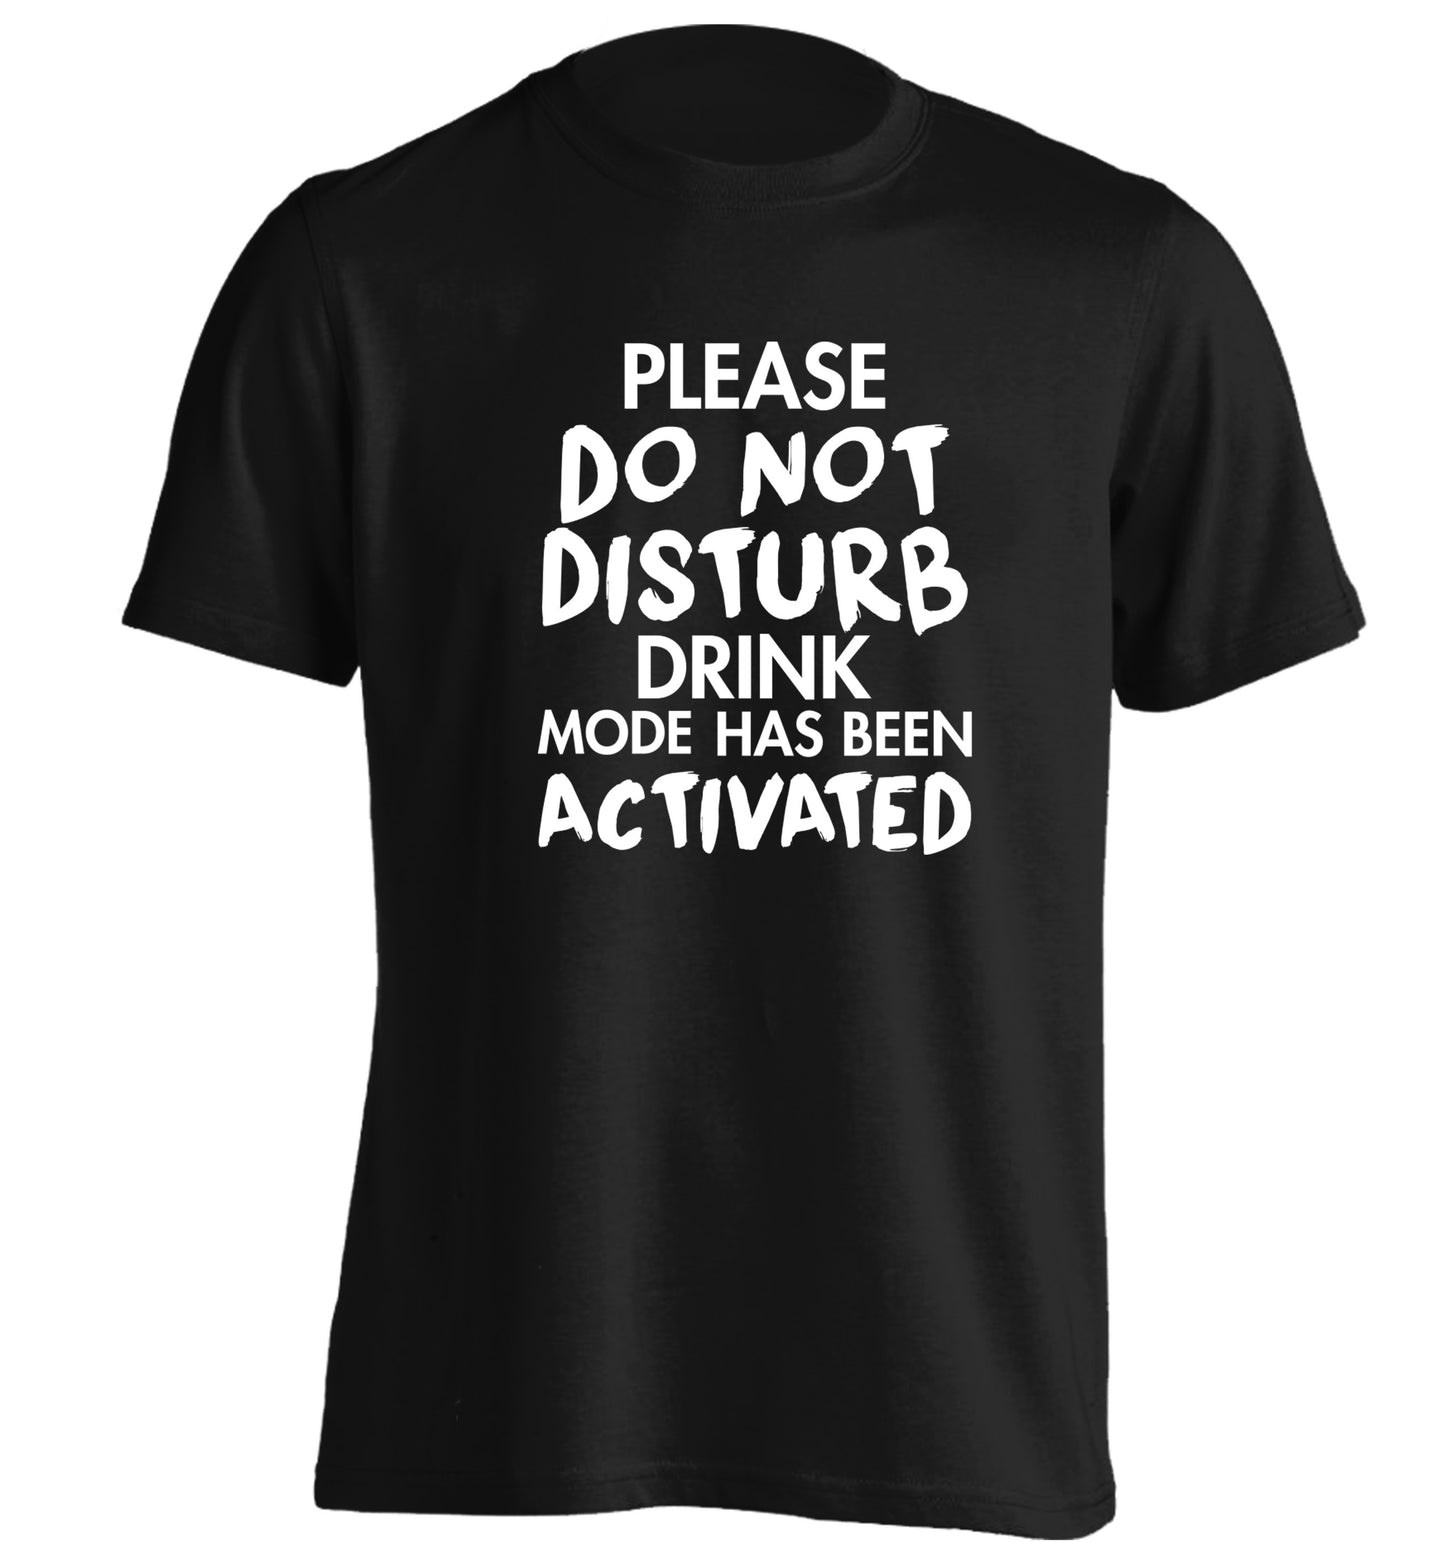 Please do not disturb drink mode has been activated adults unisex black Tshirt 2XL